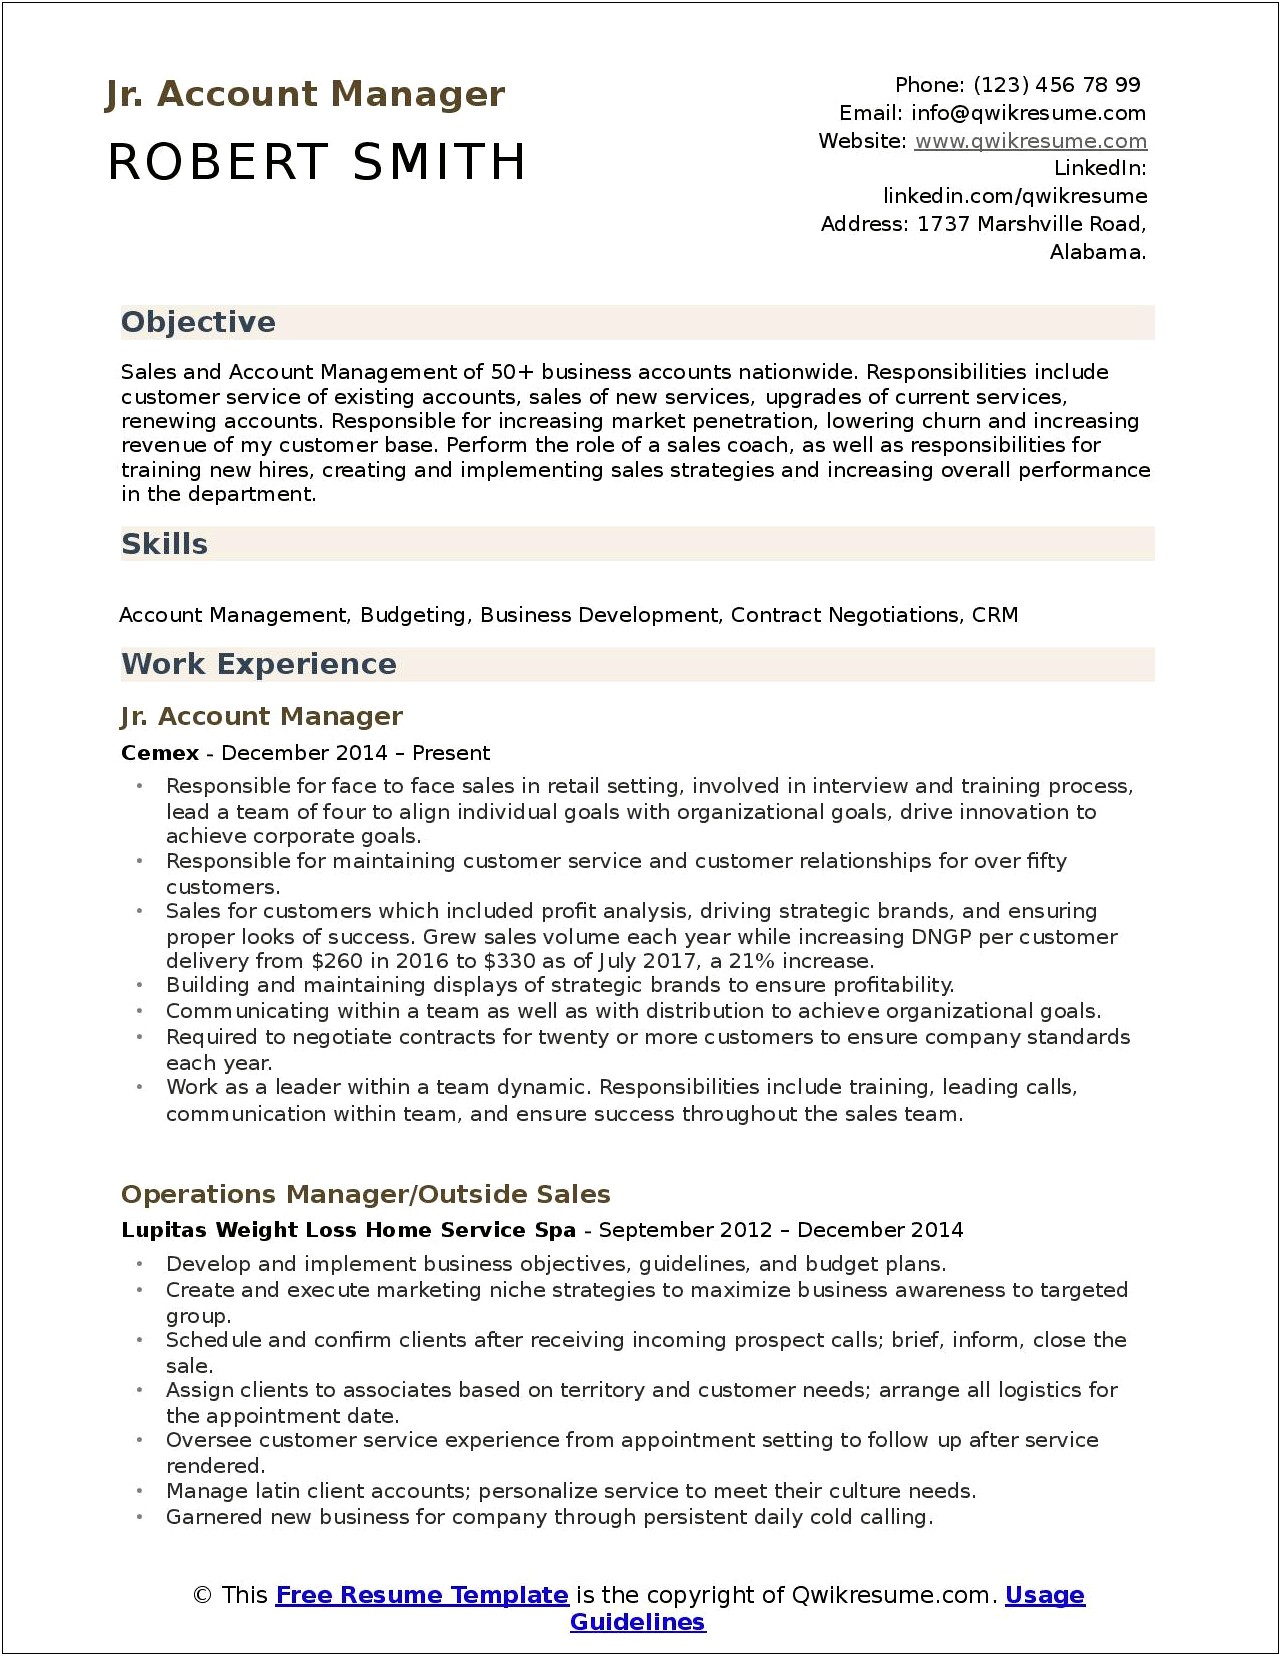 Sales Account Manager Resume Format